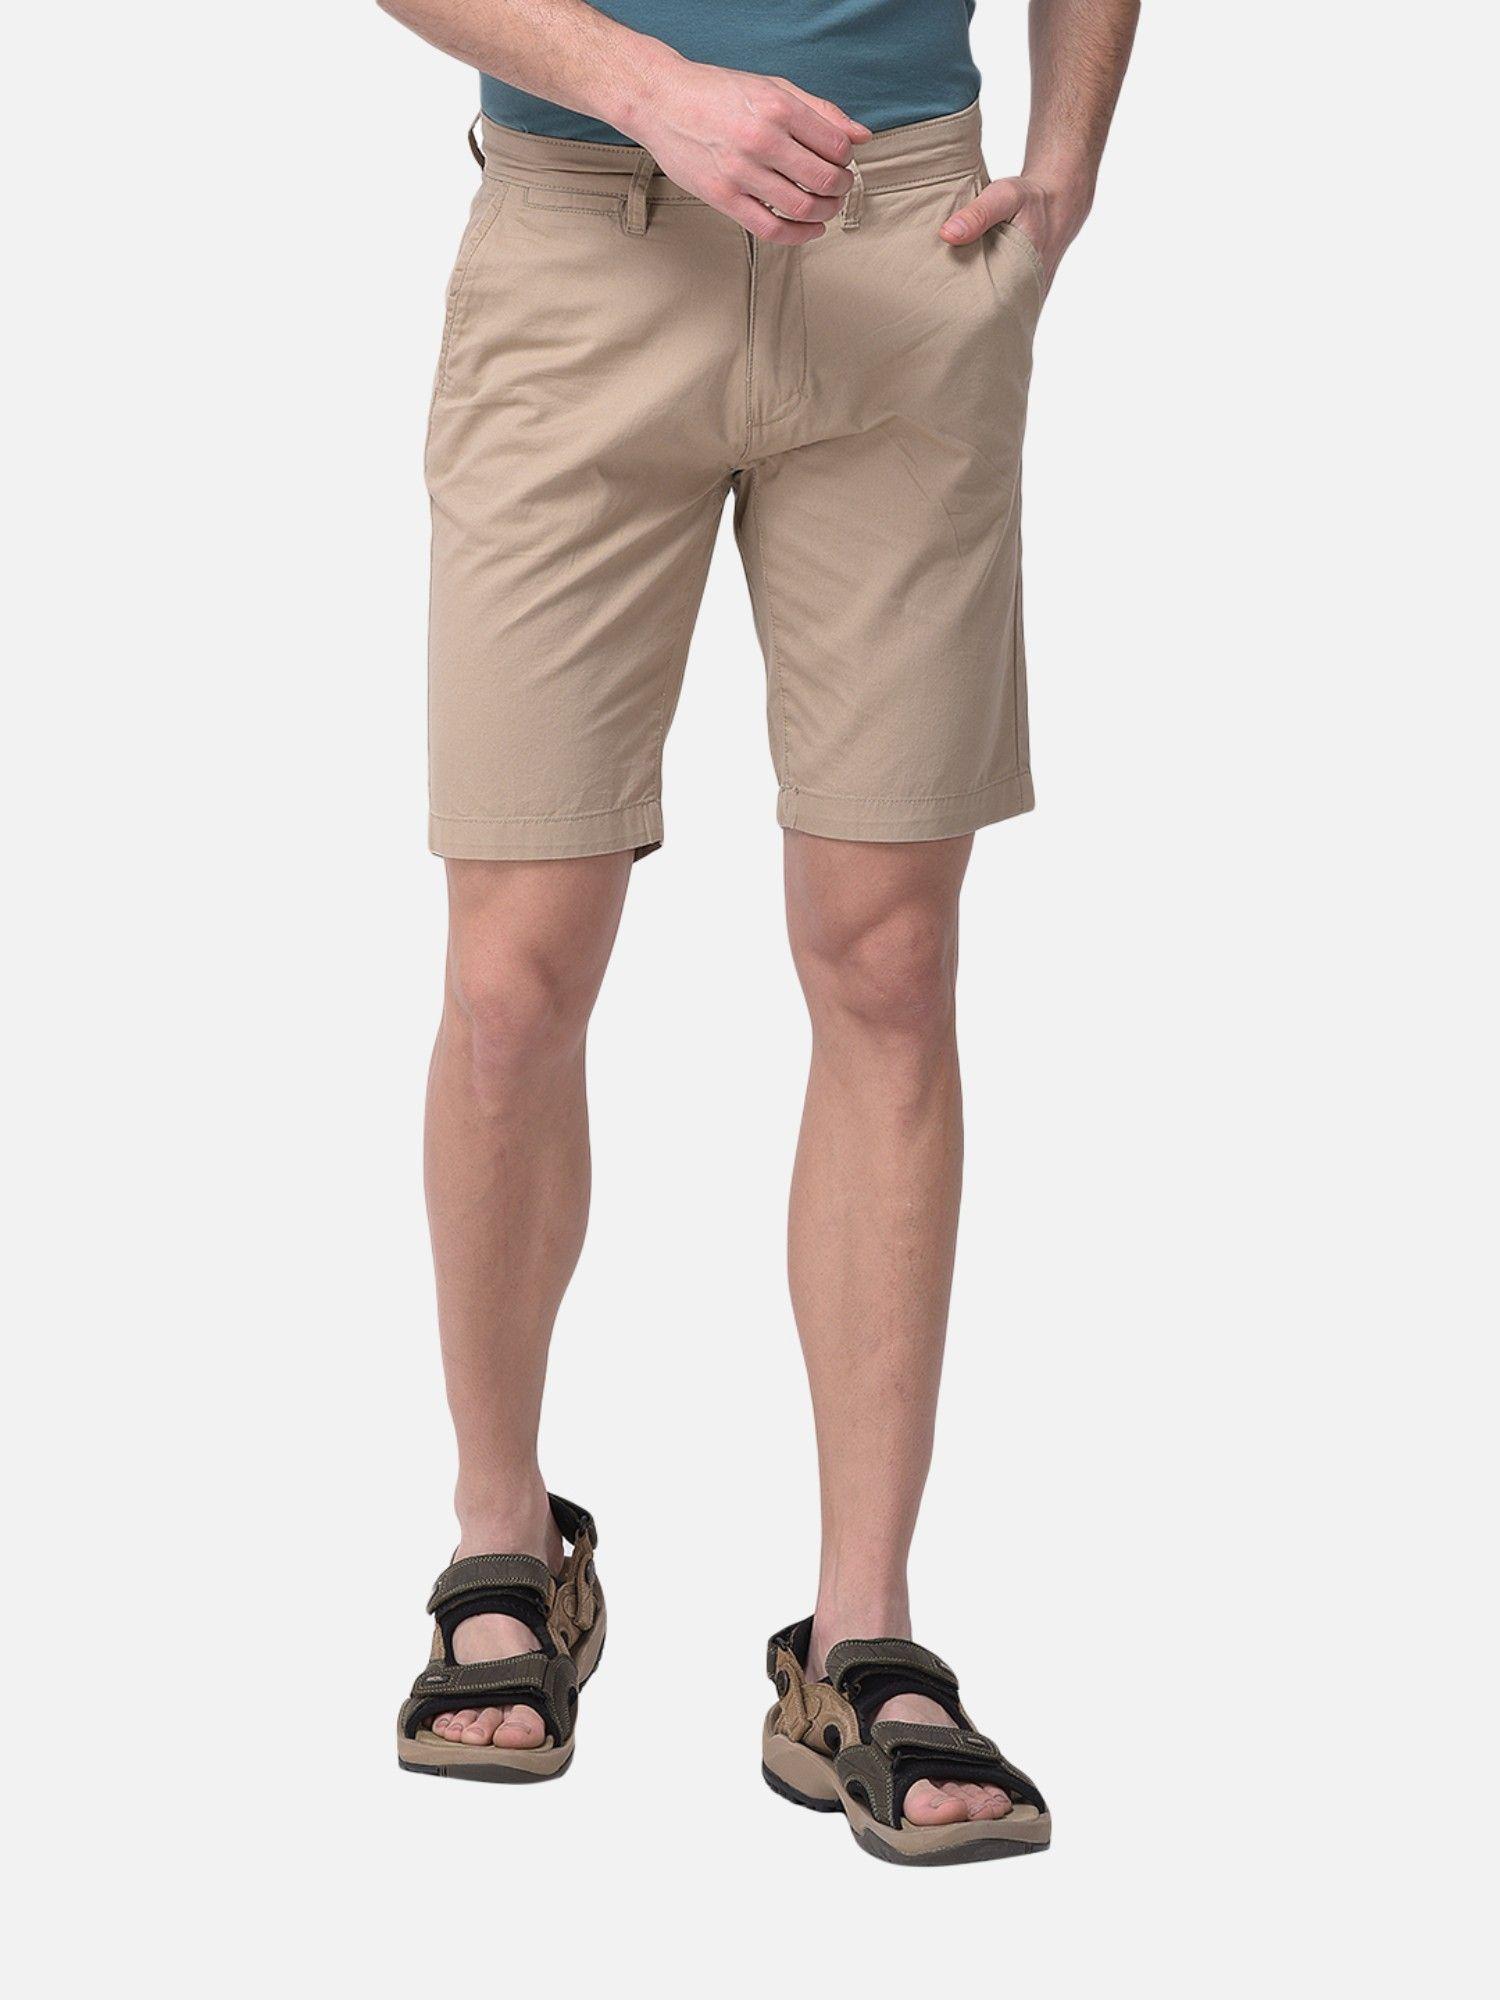 solid beige shorts